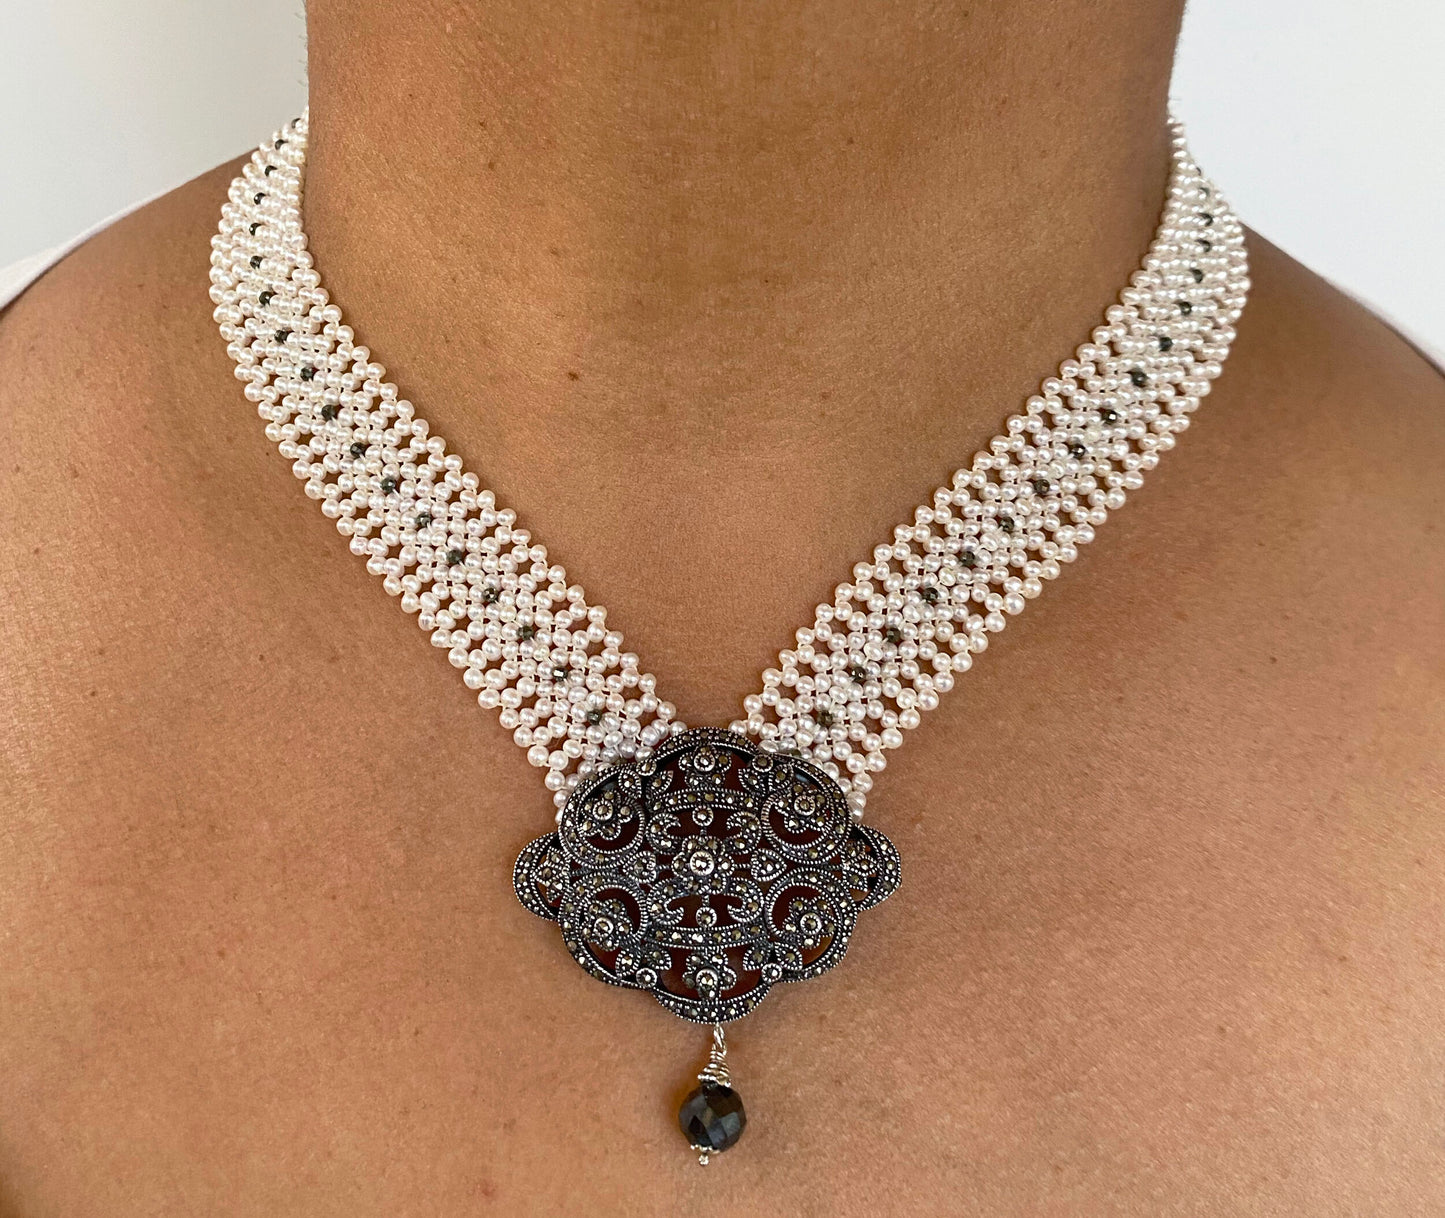 Marina J. Woven Pearl Necklace with Vintage Silver Centerpiece and Black Spinnel